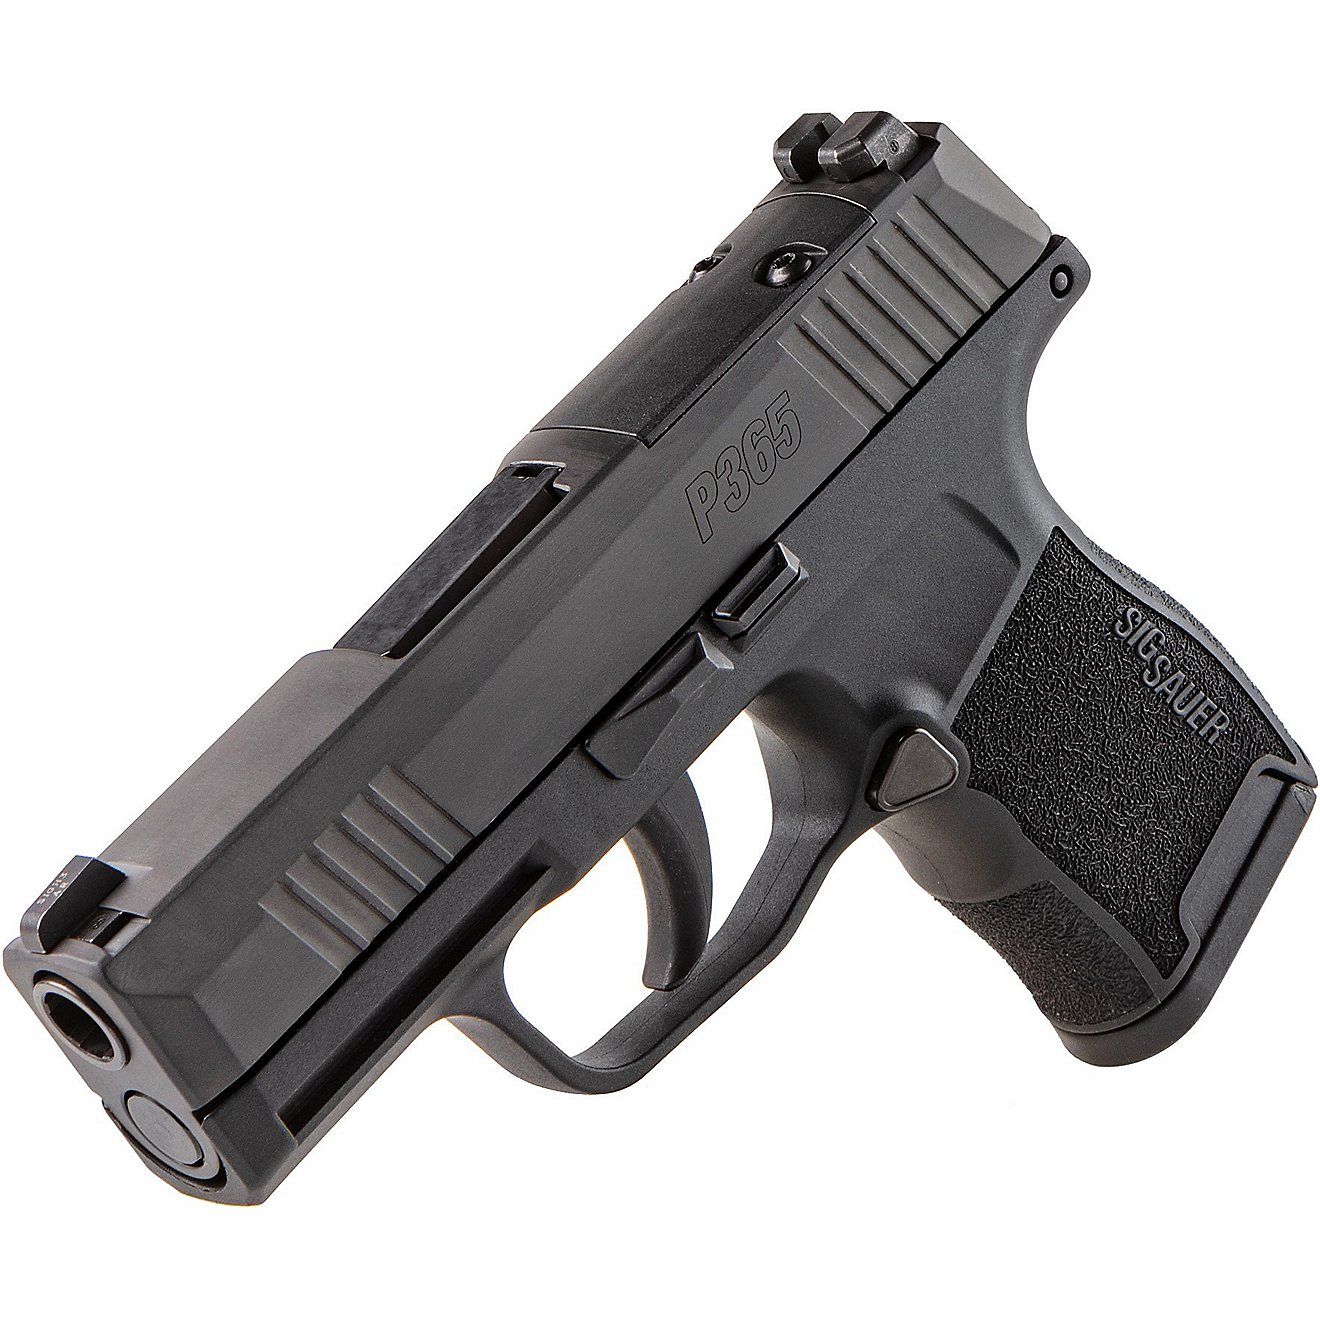 SIG SAUER P365 .380 ACP Striker Action Pistol with Night Sights                                                                  - view number 2